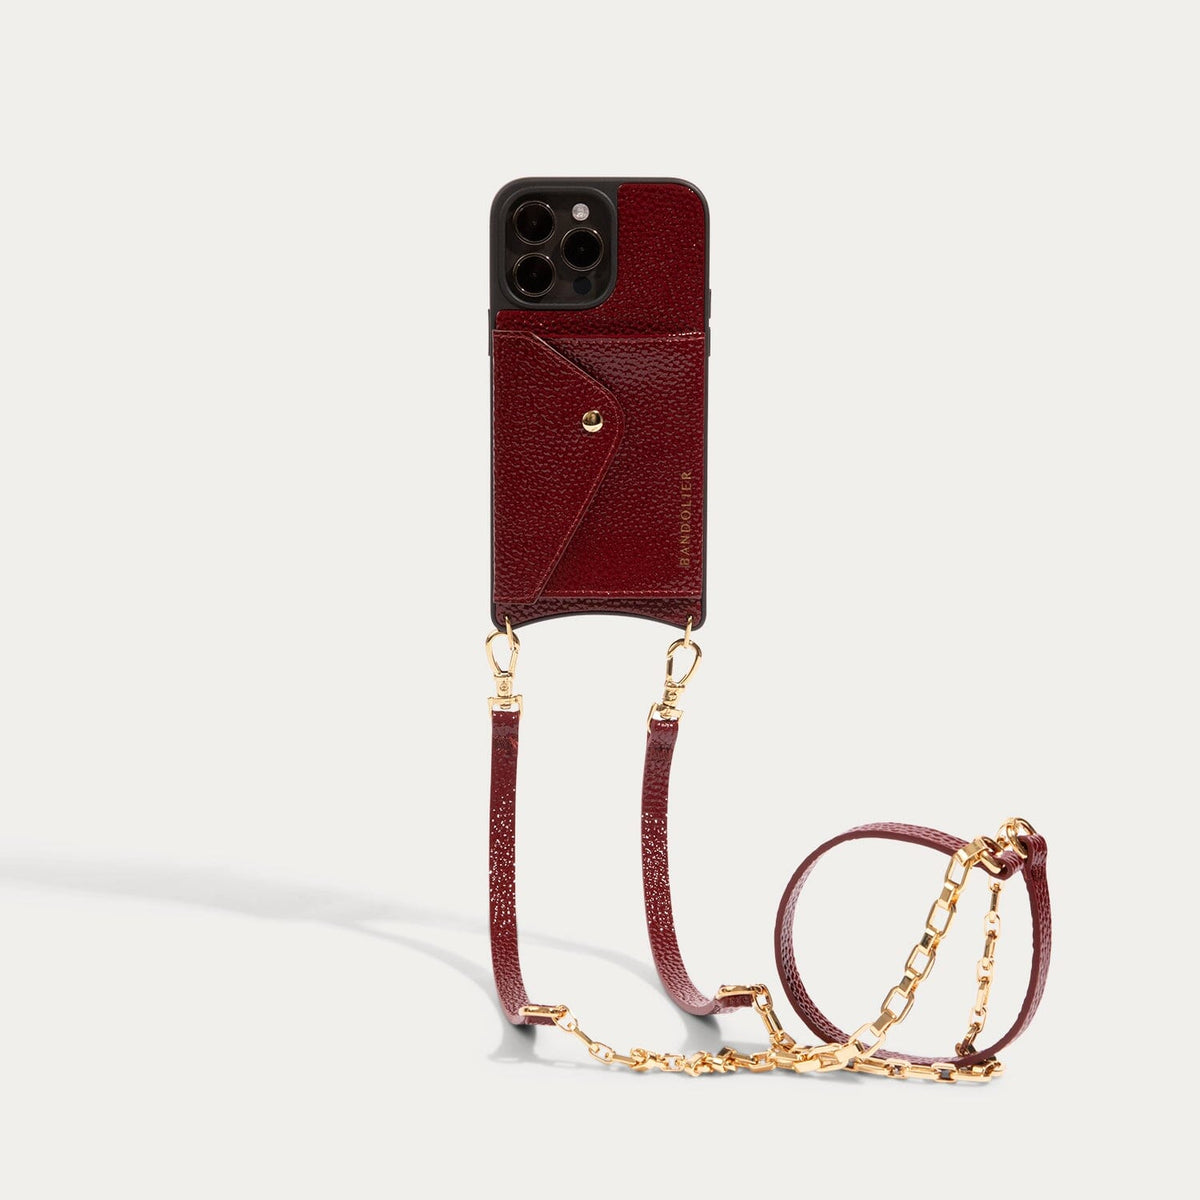 5 Features That Make the Bandolier Phone Case the Ultimate Fashion